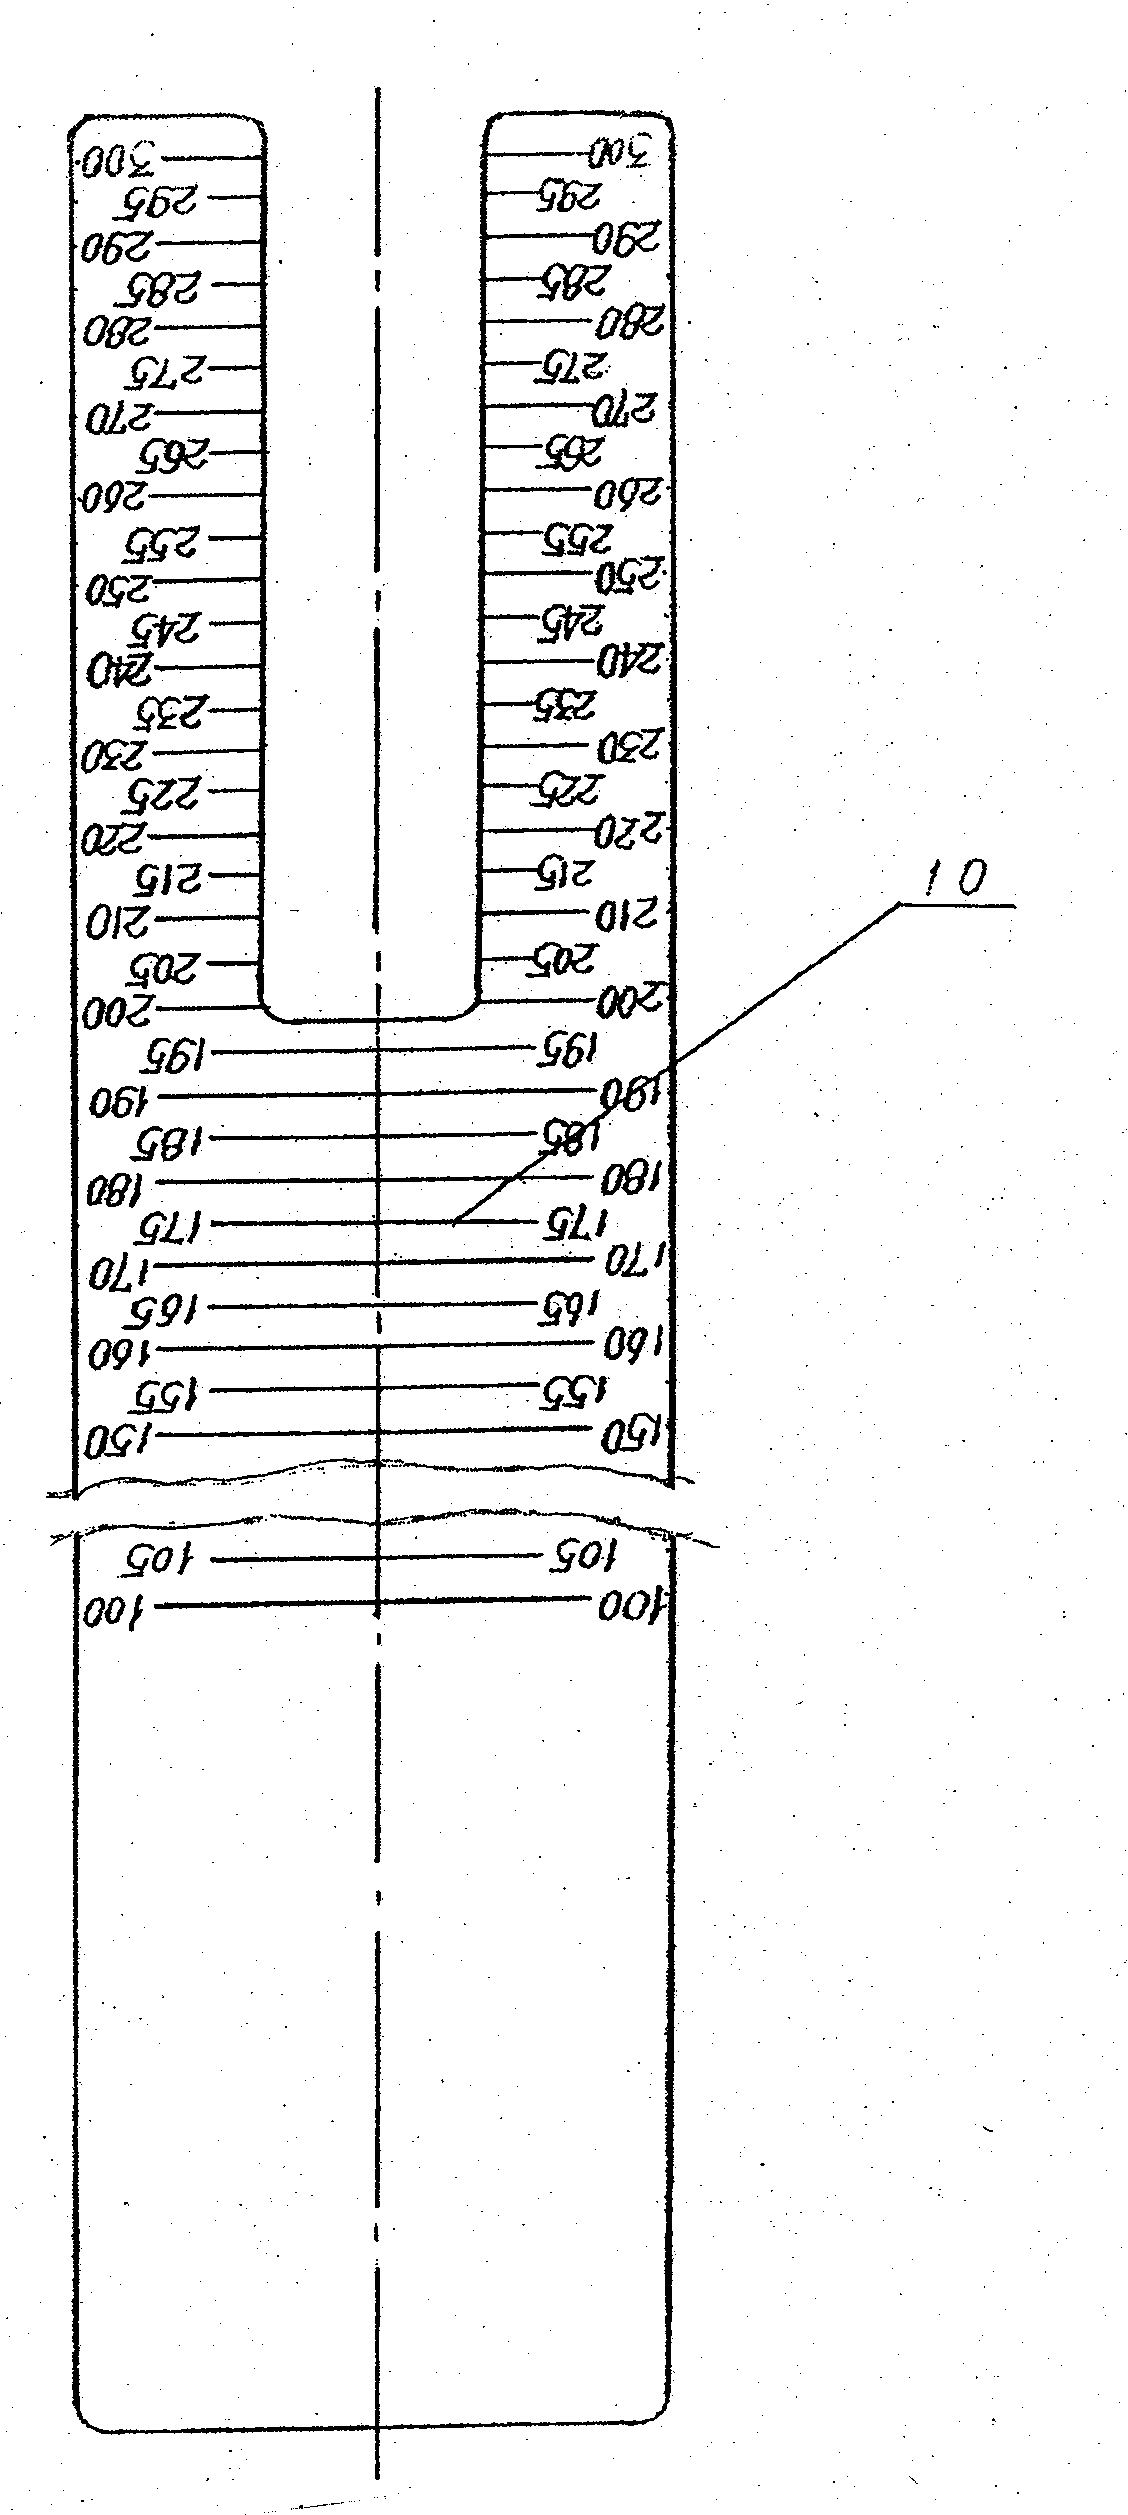 Foot type measurer based on Chinese shoe size and type